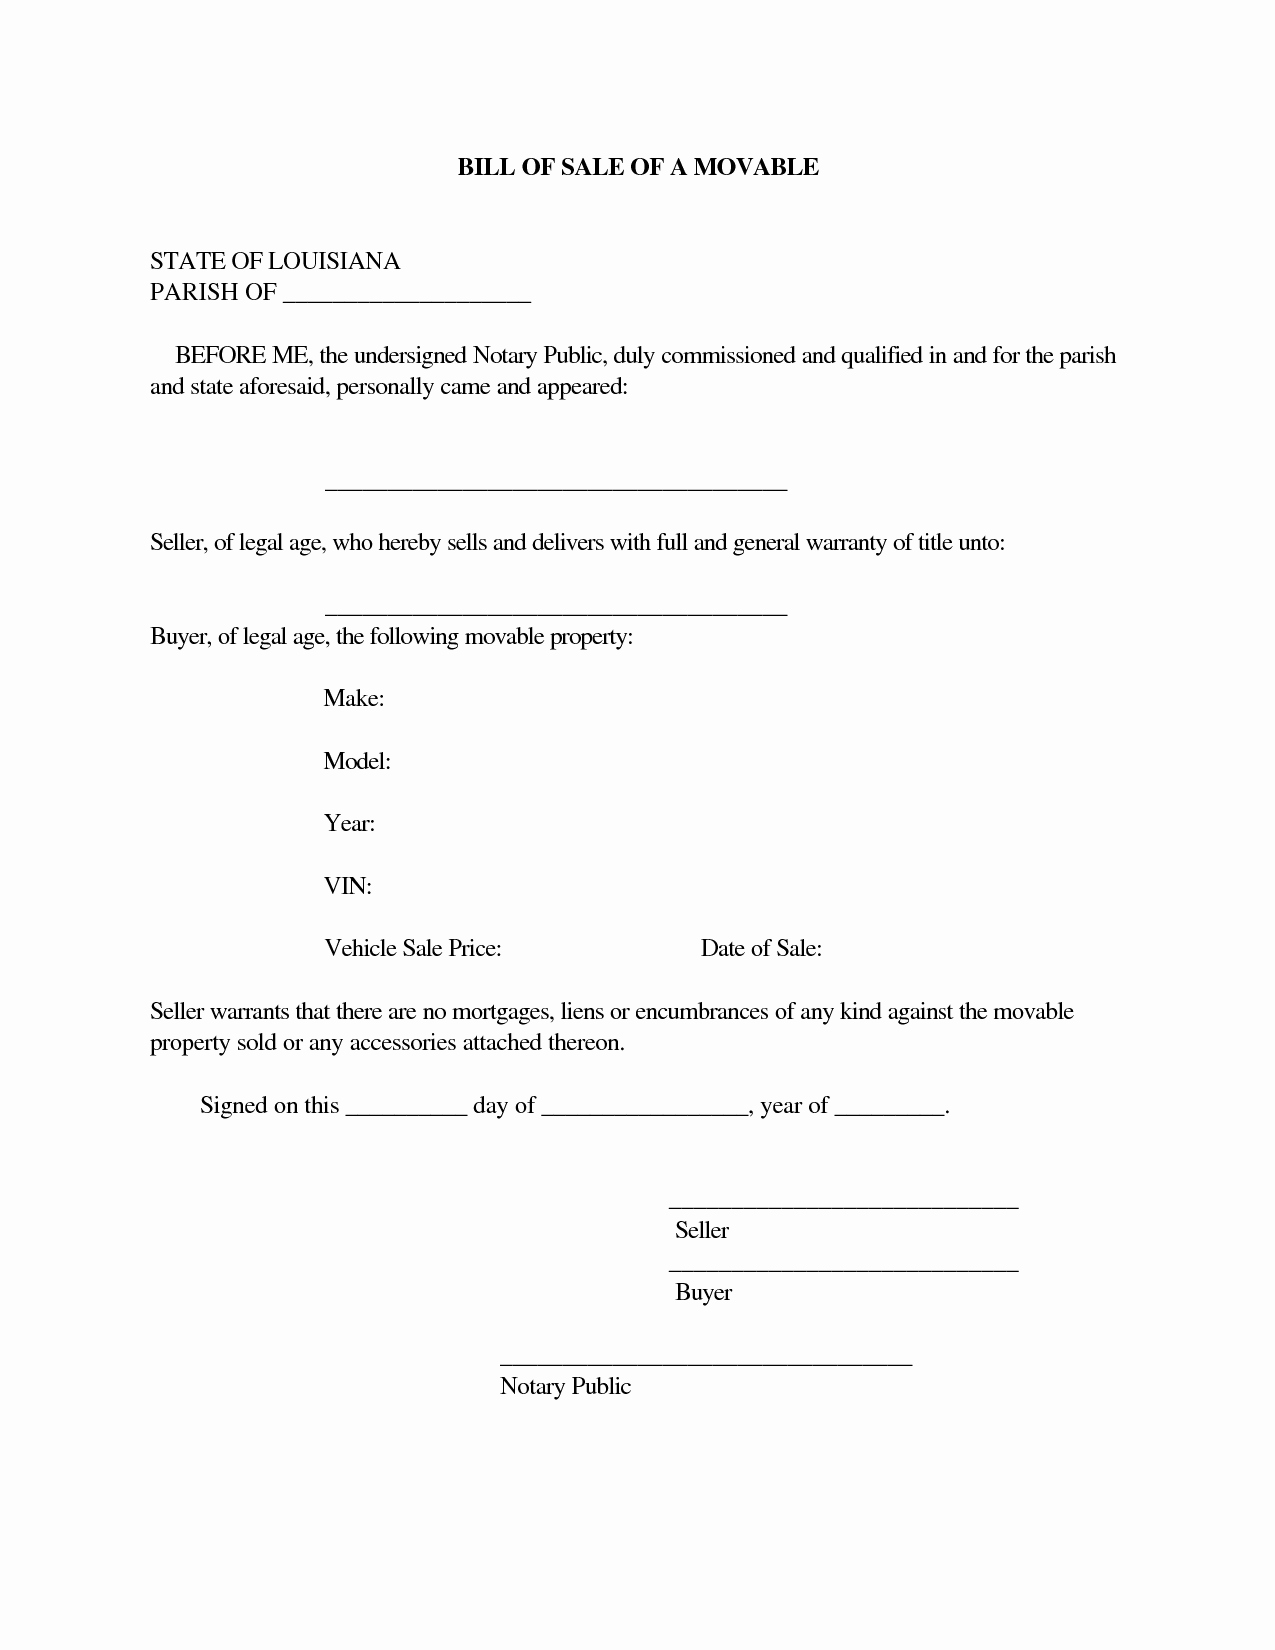 Free forms Bill Of Sale Awesome Free Printable Rv Bill Of Sale form form Generic